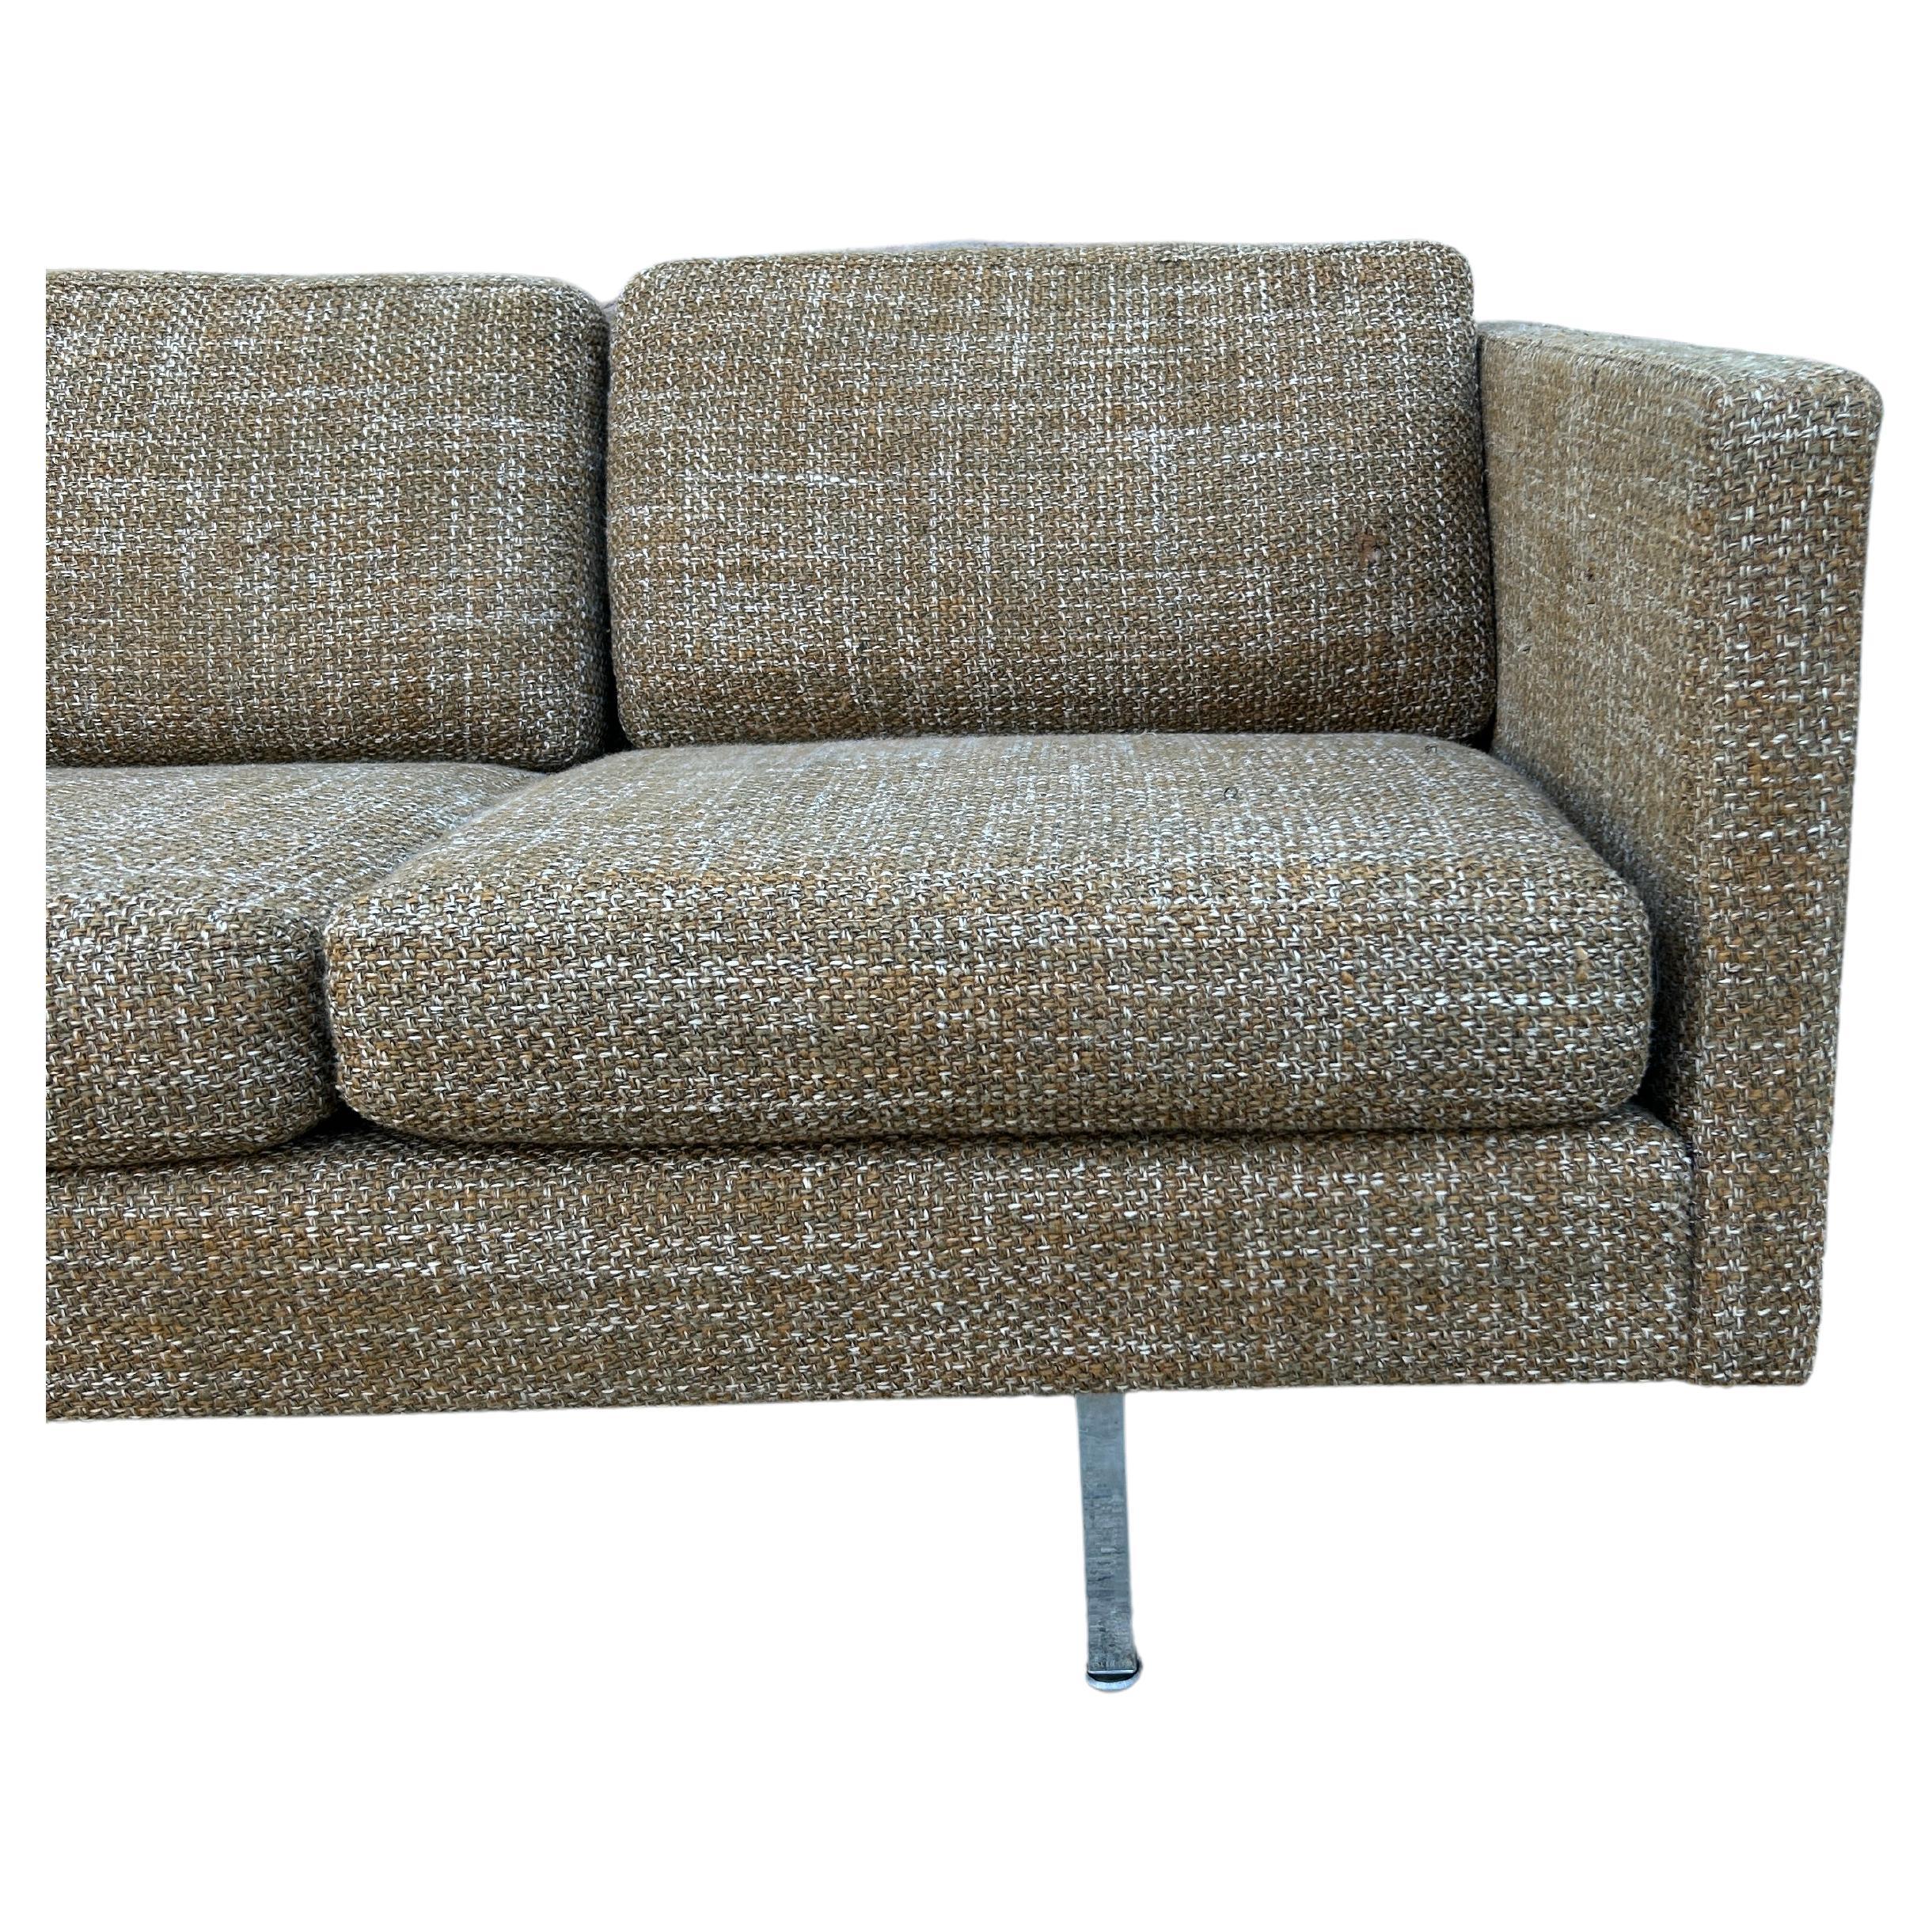 Chrome Mid-Century Danish Modern Cube 3 Seat Sofa in Brown Woven Upholstery For Sale